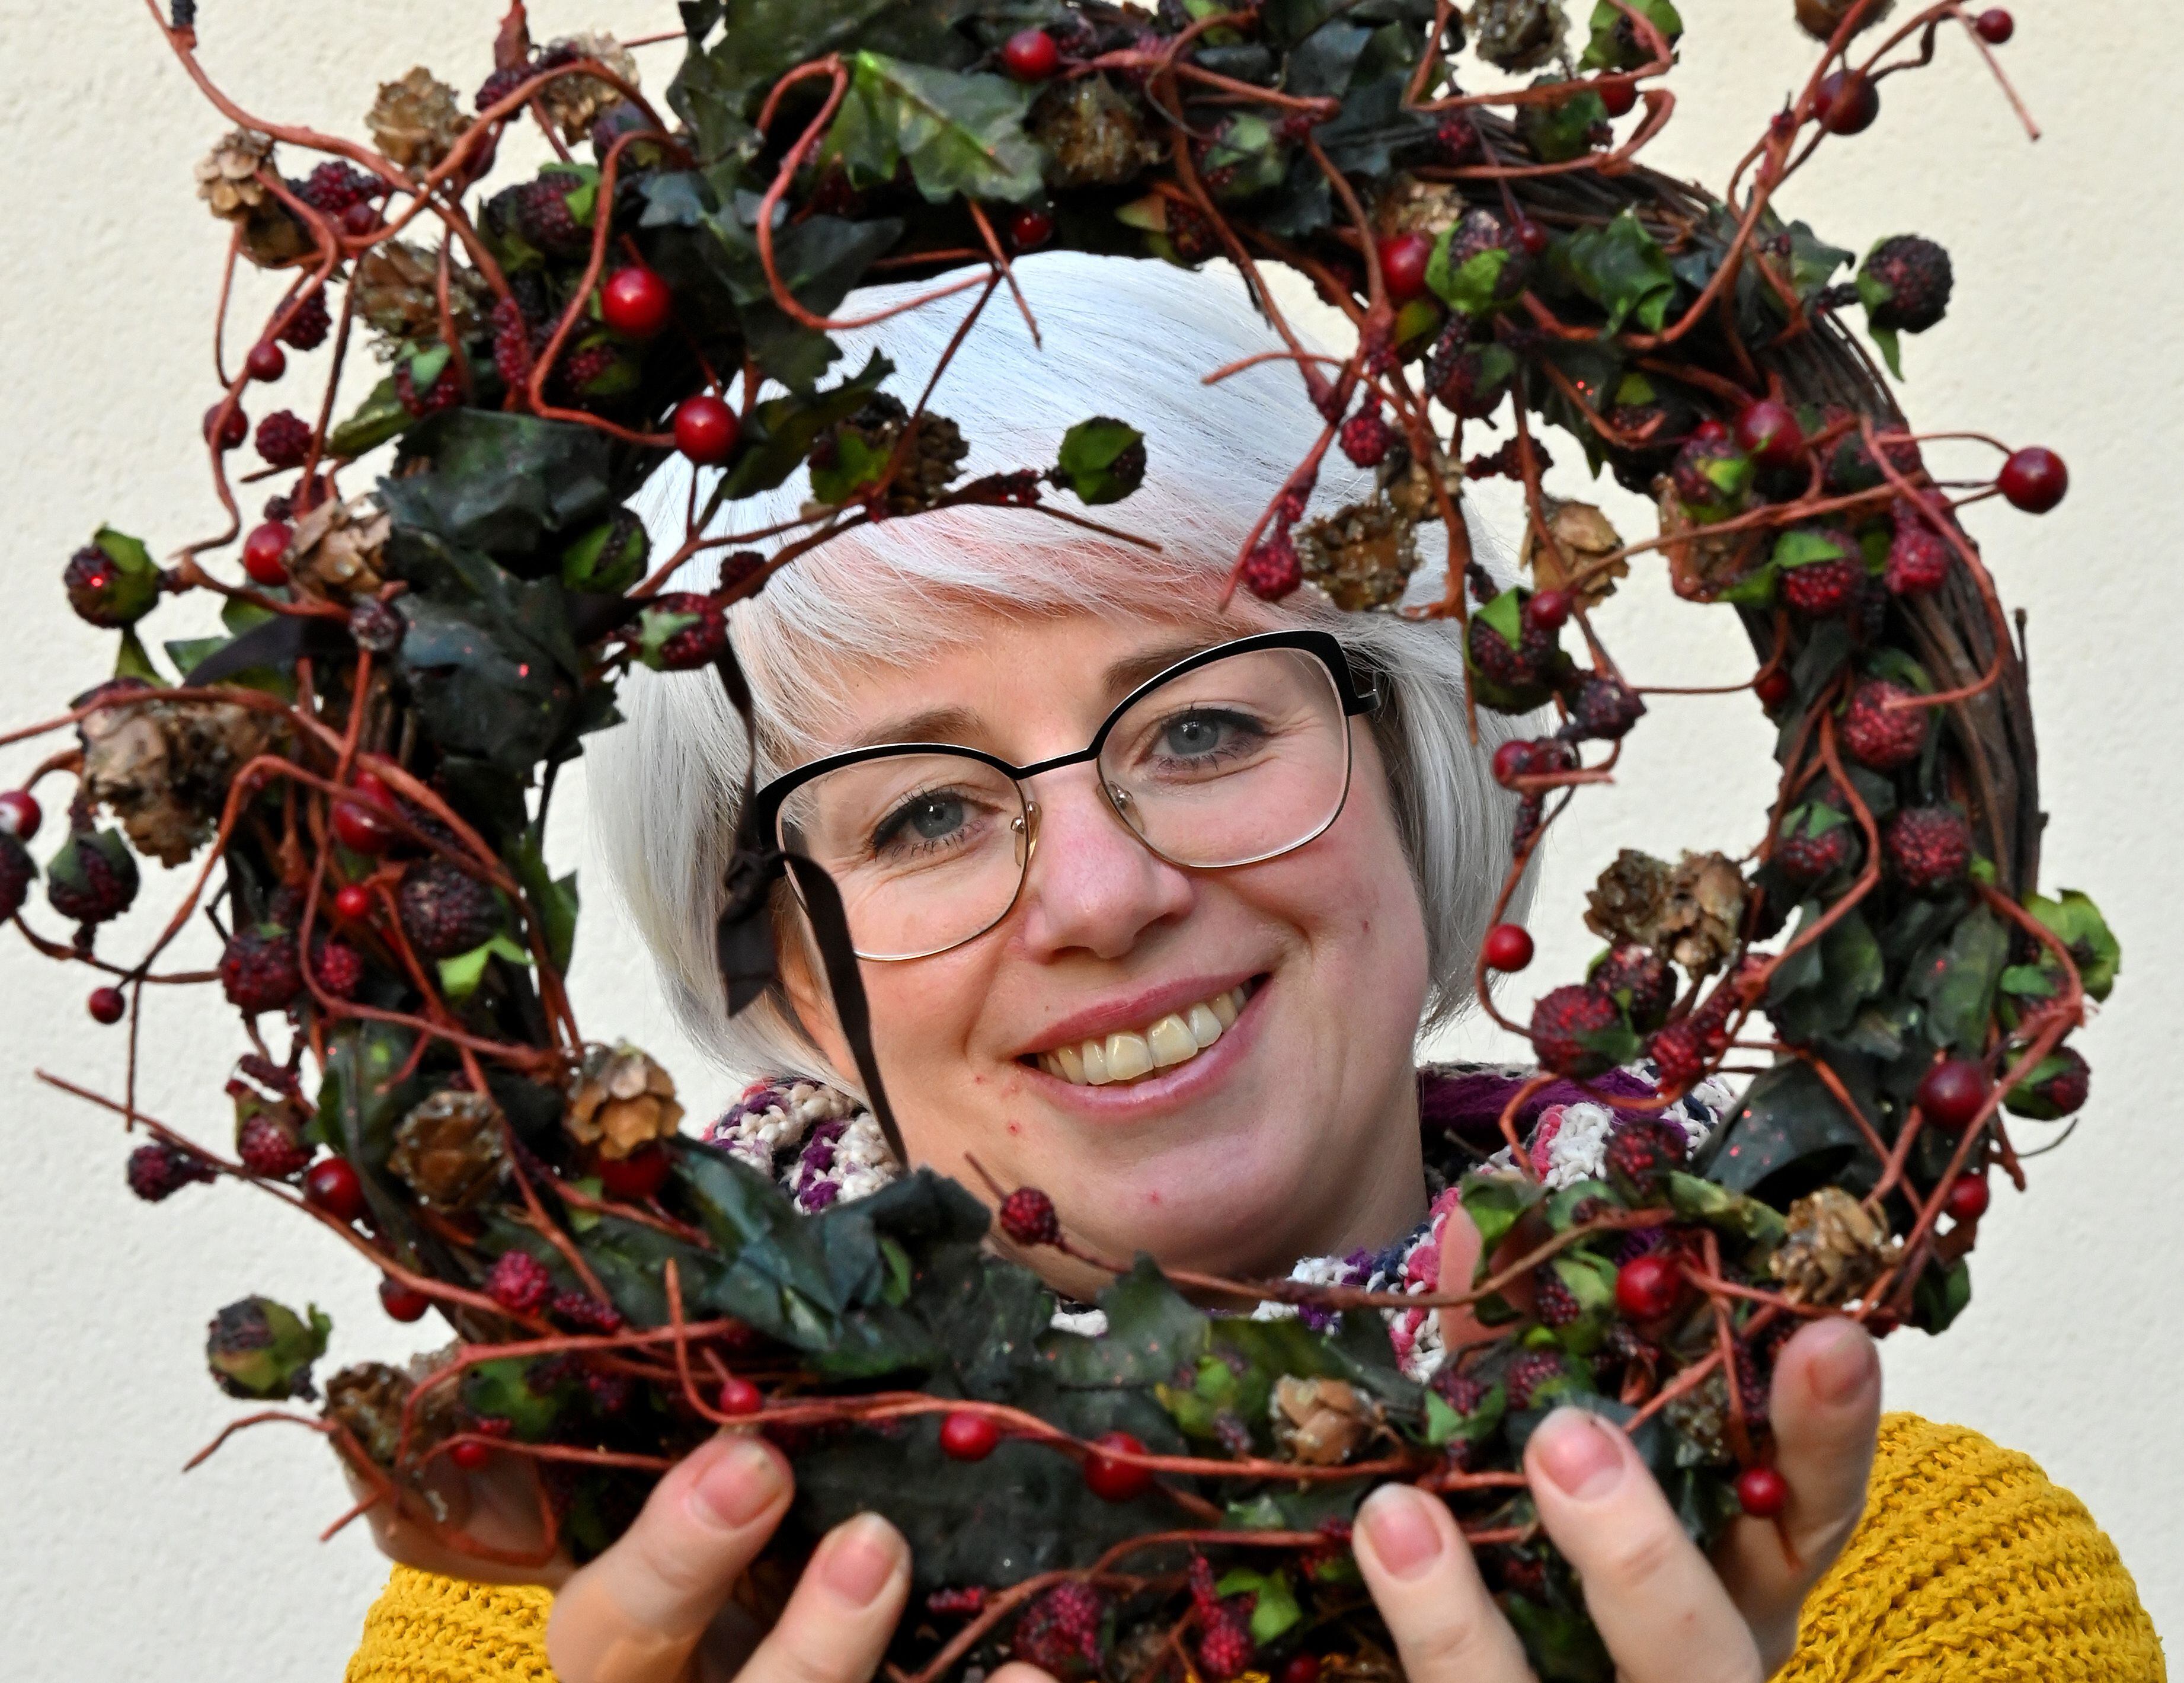 Christmas wreath making workshop being held at Stourbridge Glass Museum